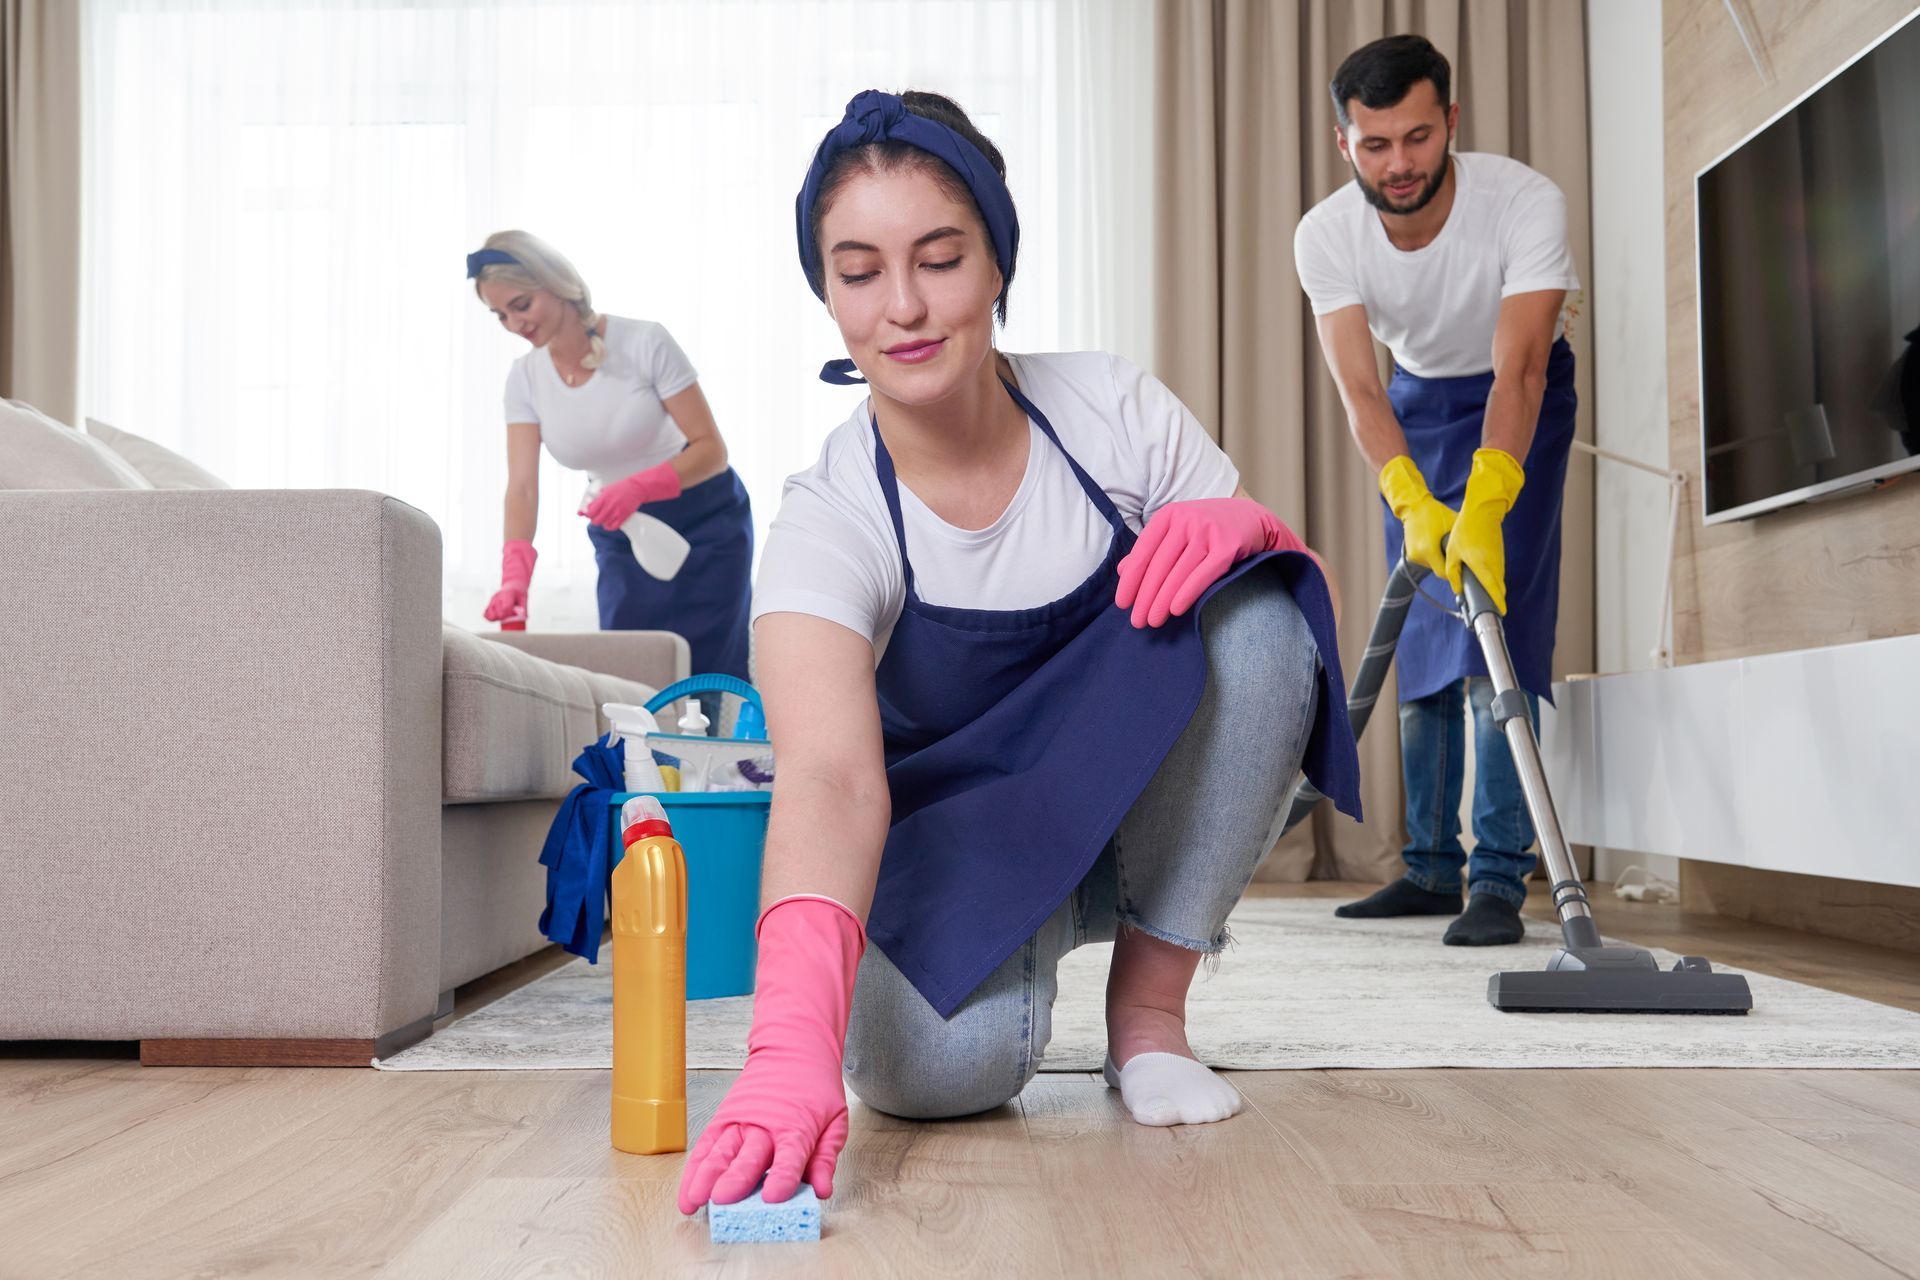 professional cleaning service team cleans a modern living room